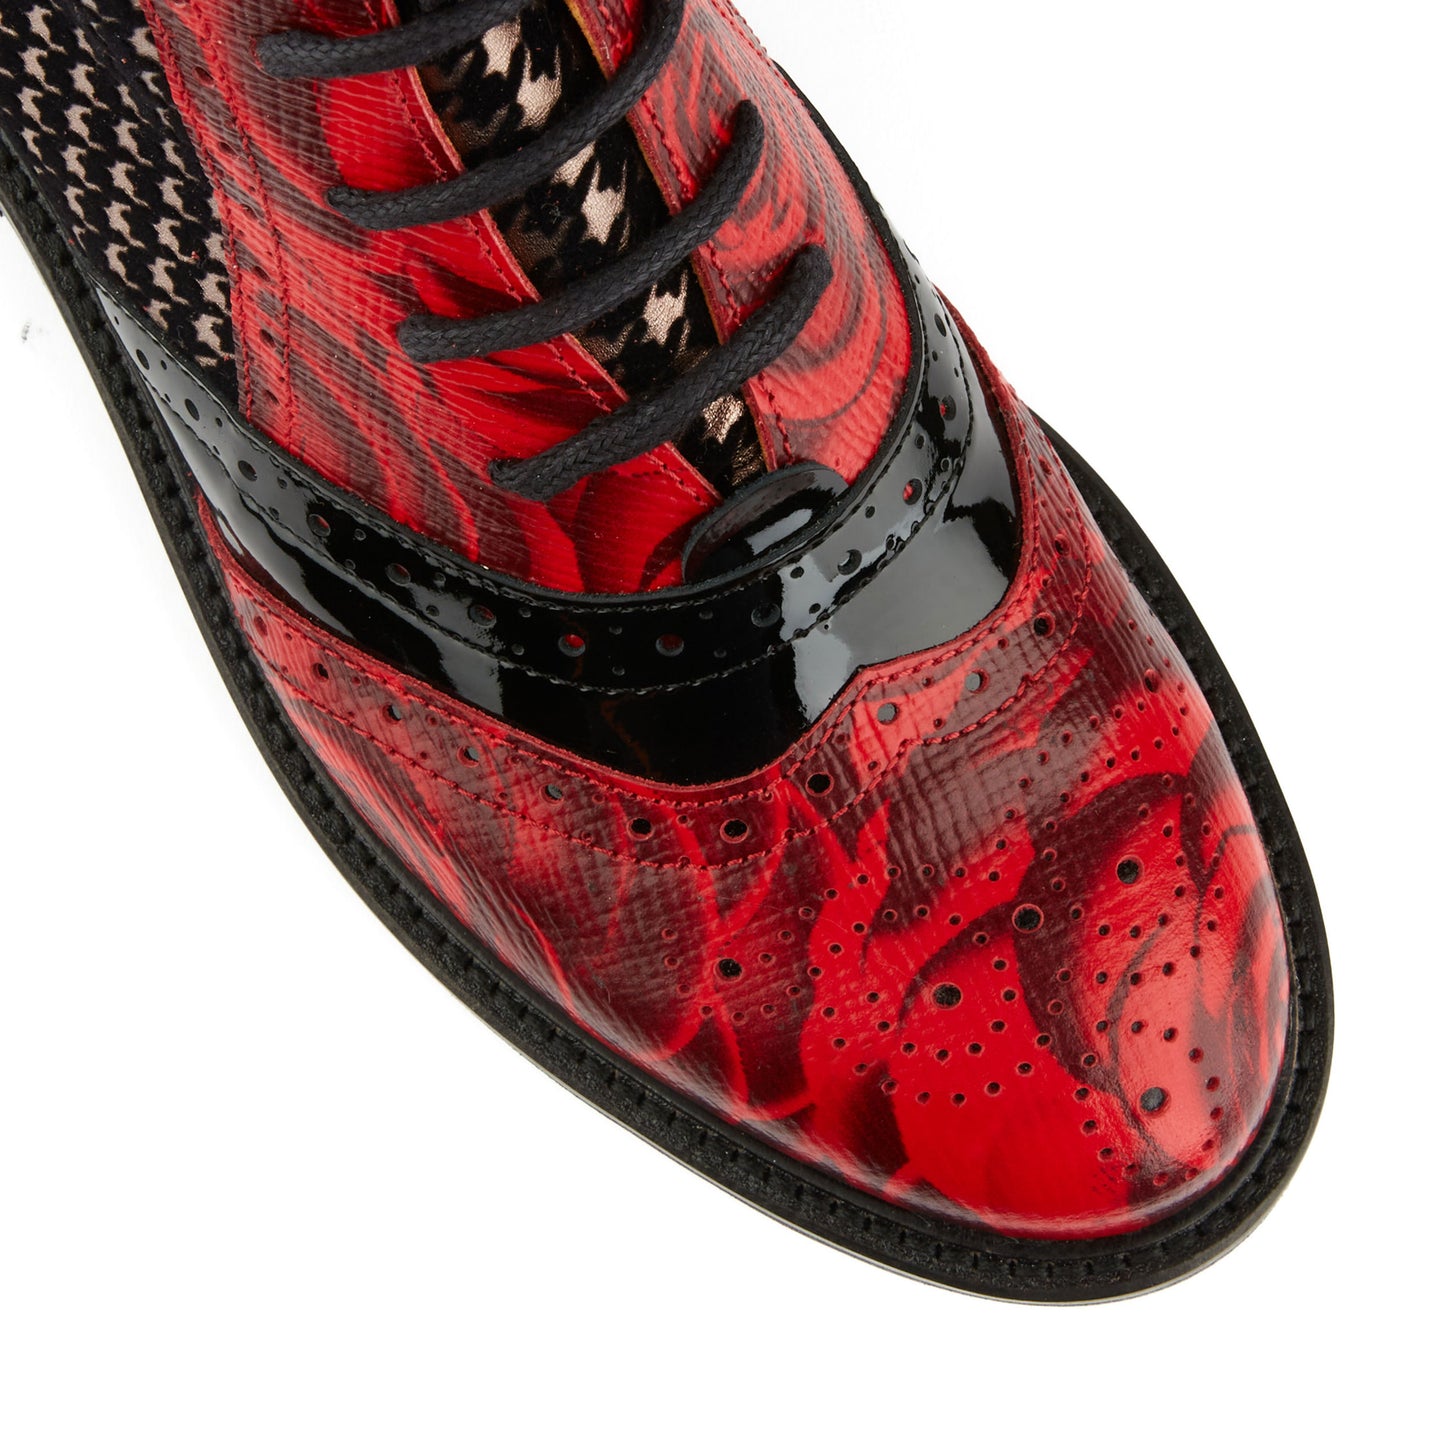 Brick Lane Boots - Red Rose & Houndstooth